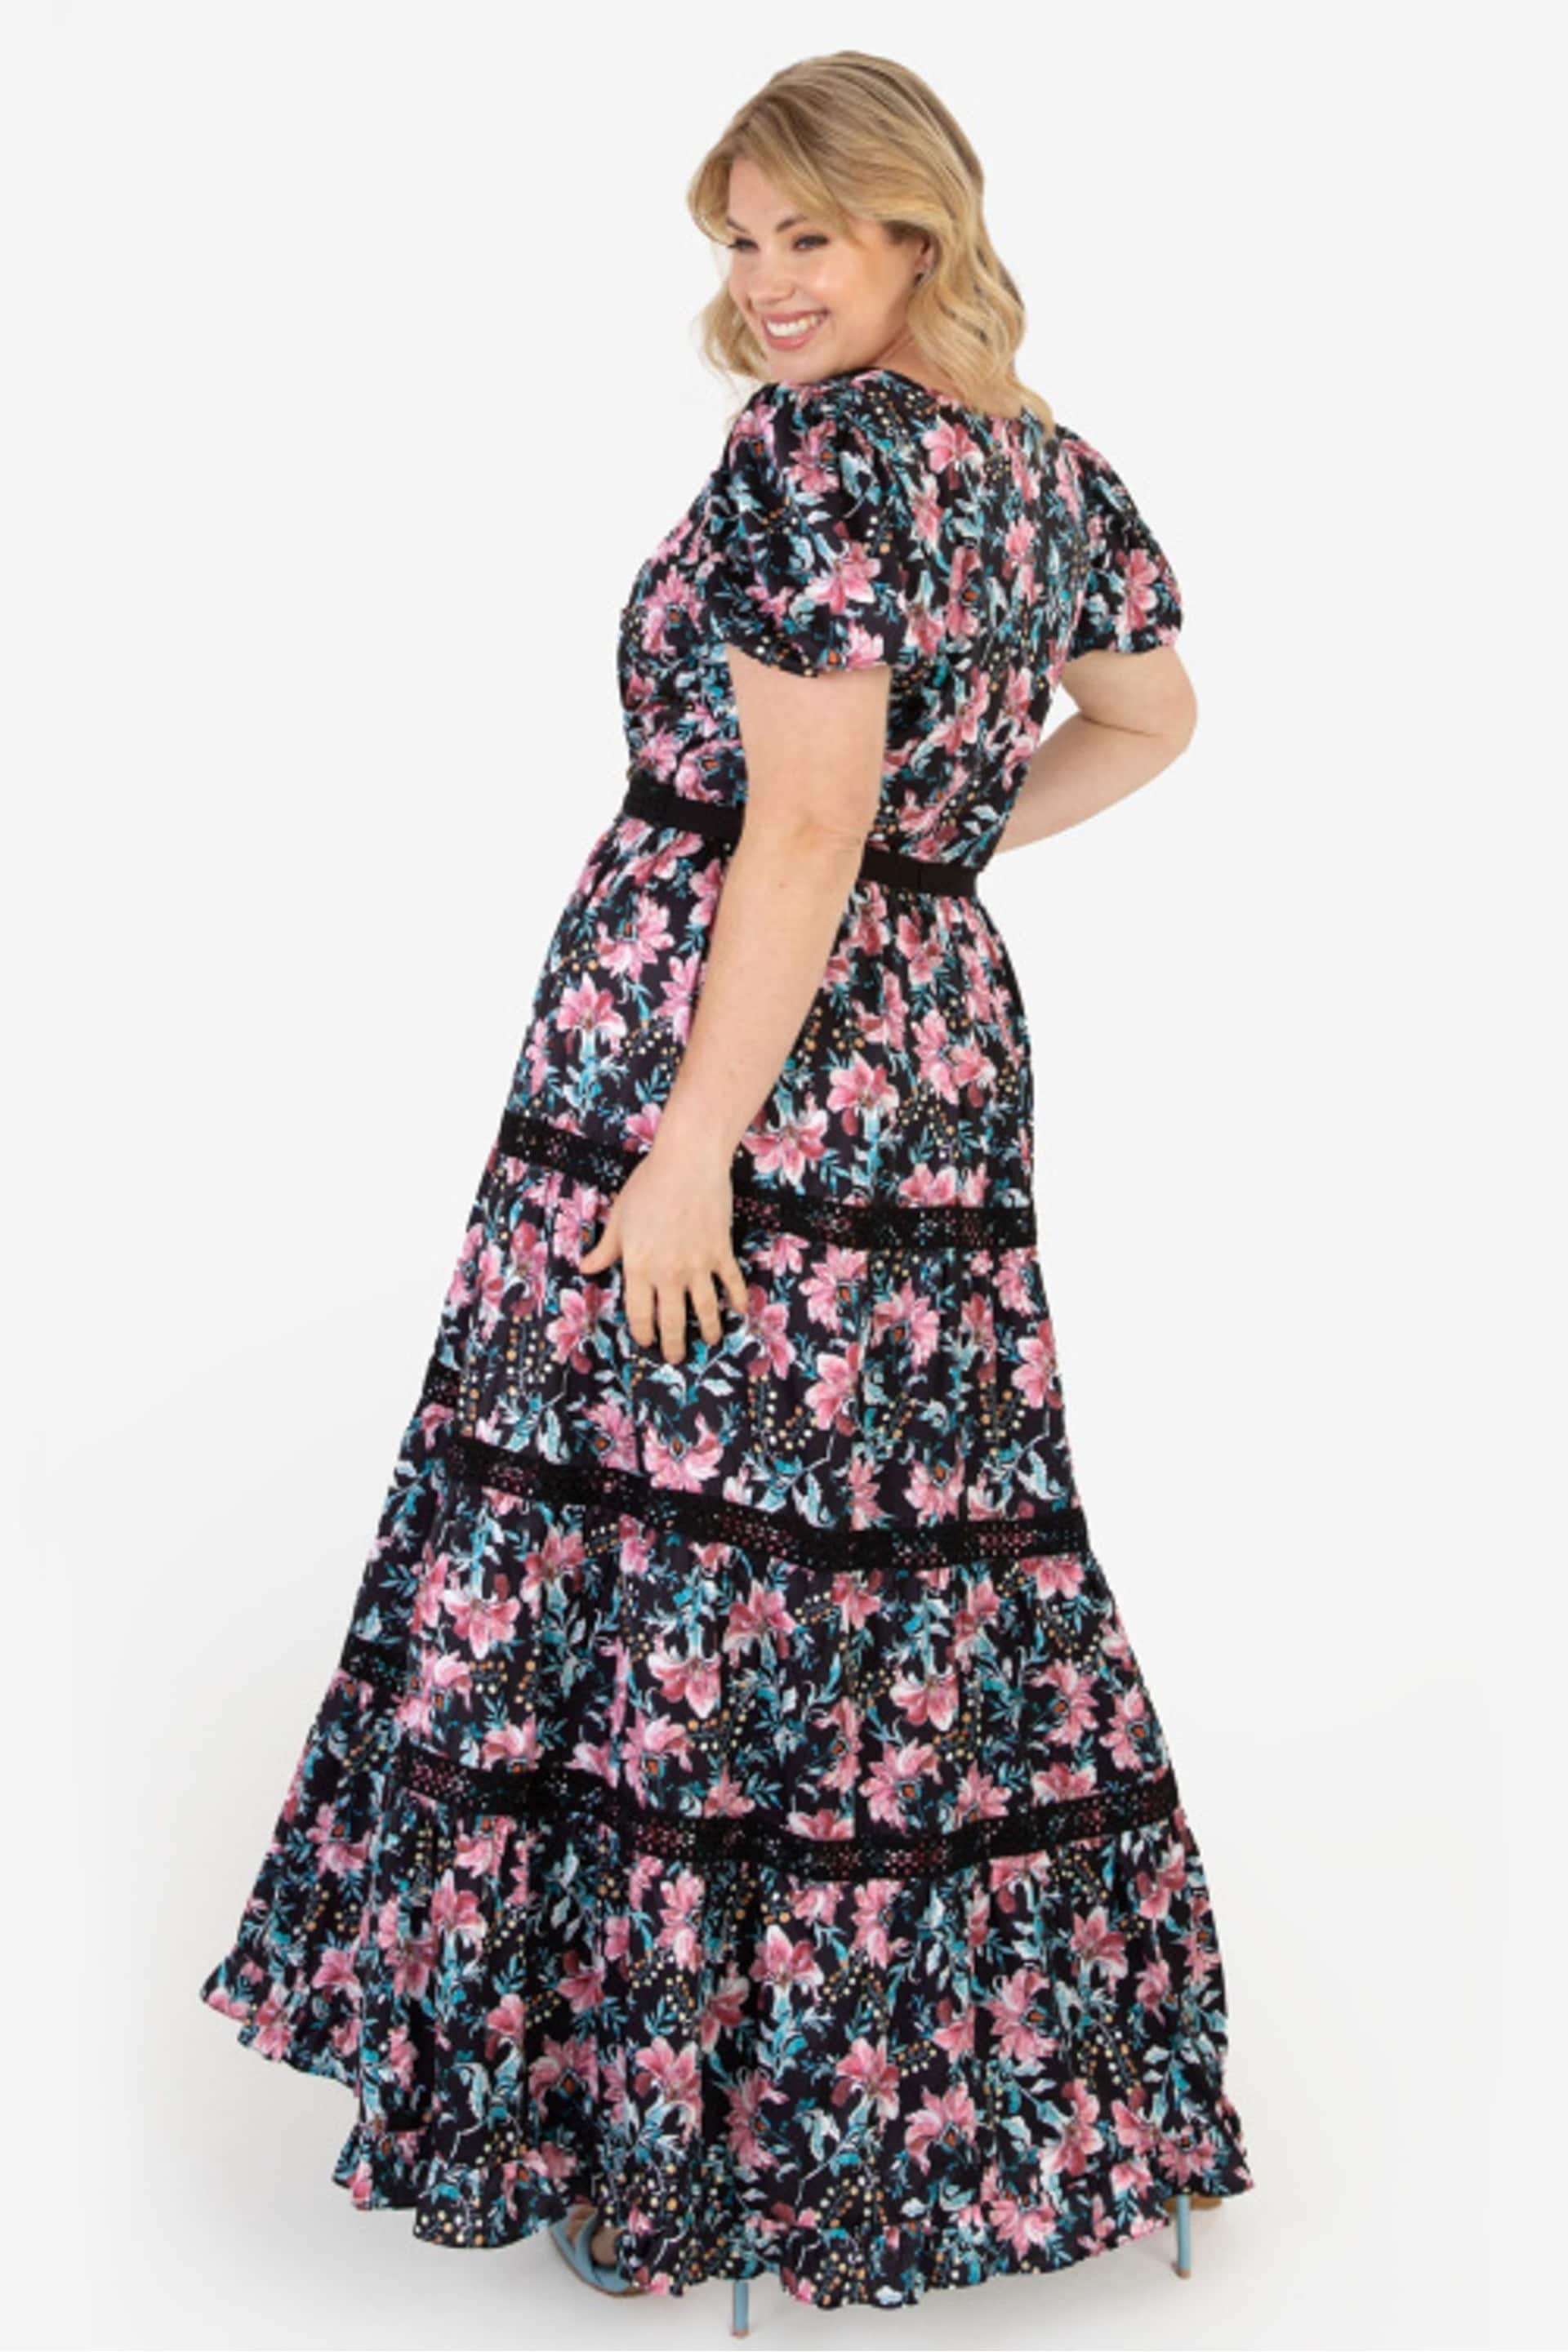 Lovedrobe Black Dark Floral Print And Lace Maxi Dress - Image 2 of 4